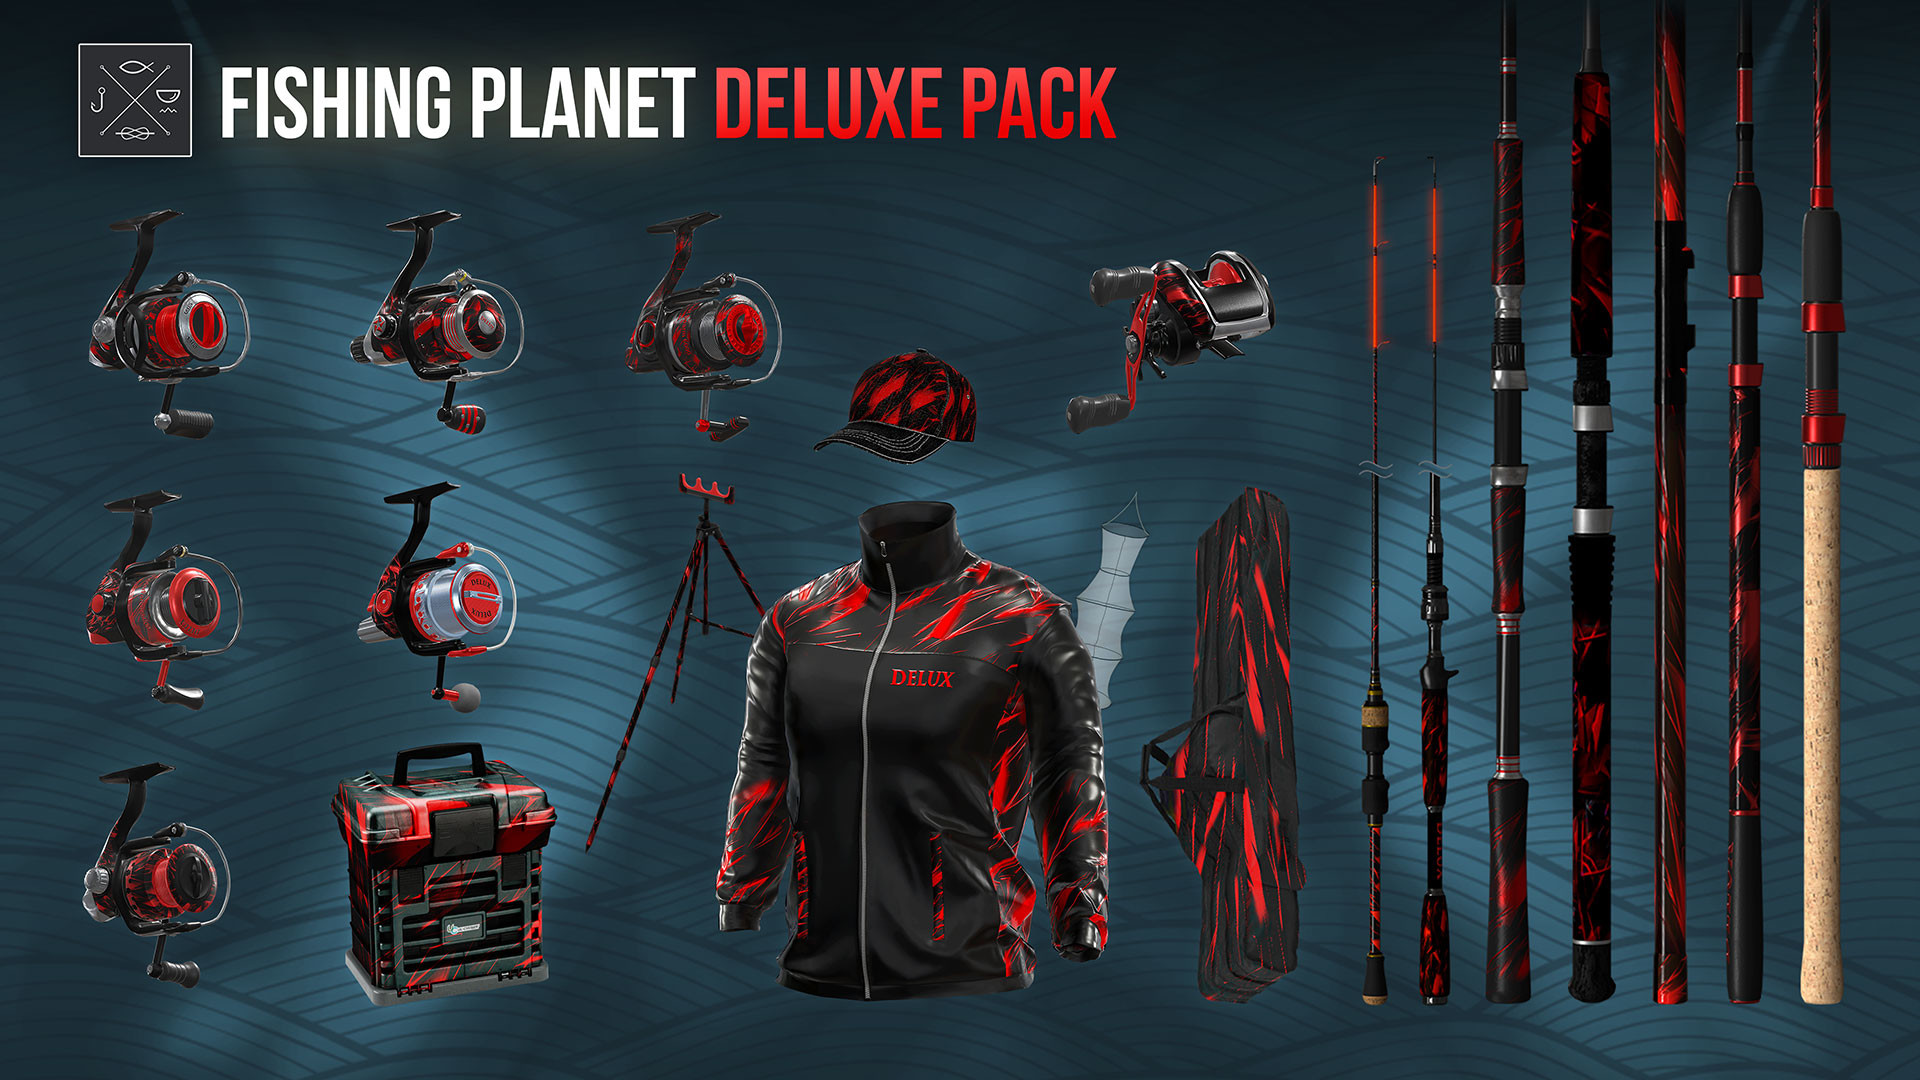 Fishing Planet - Deluxe Pack DLC EU v2 Steam Altergift [USD 43.05]